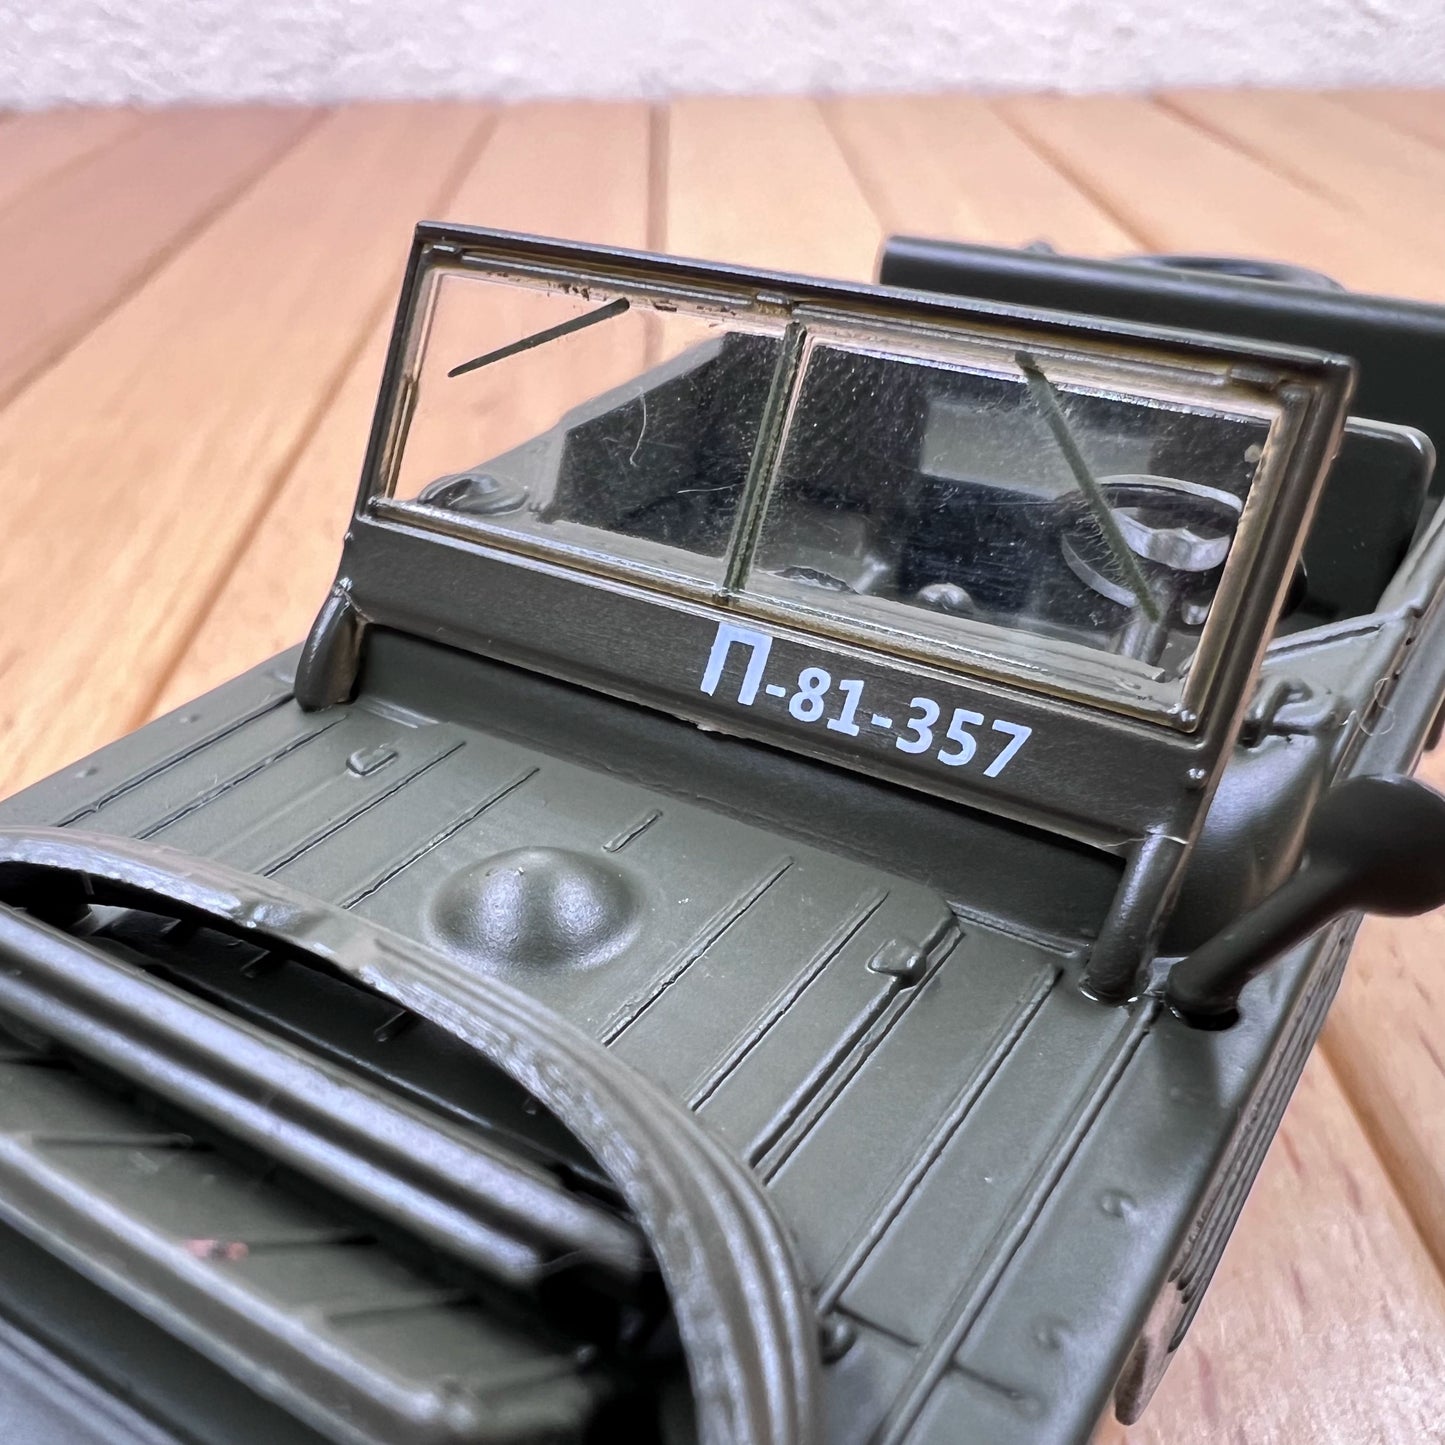 1/43 Scale WWII Ford GPA Seep Amphibious Jeep Diecast Model Car